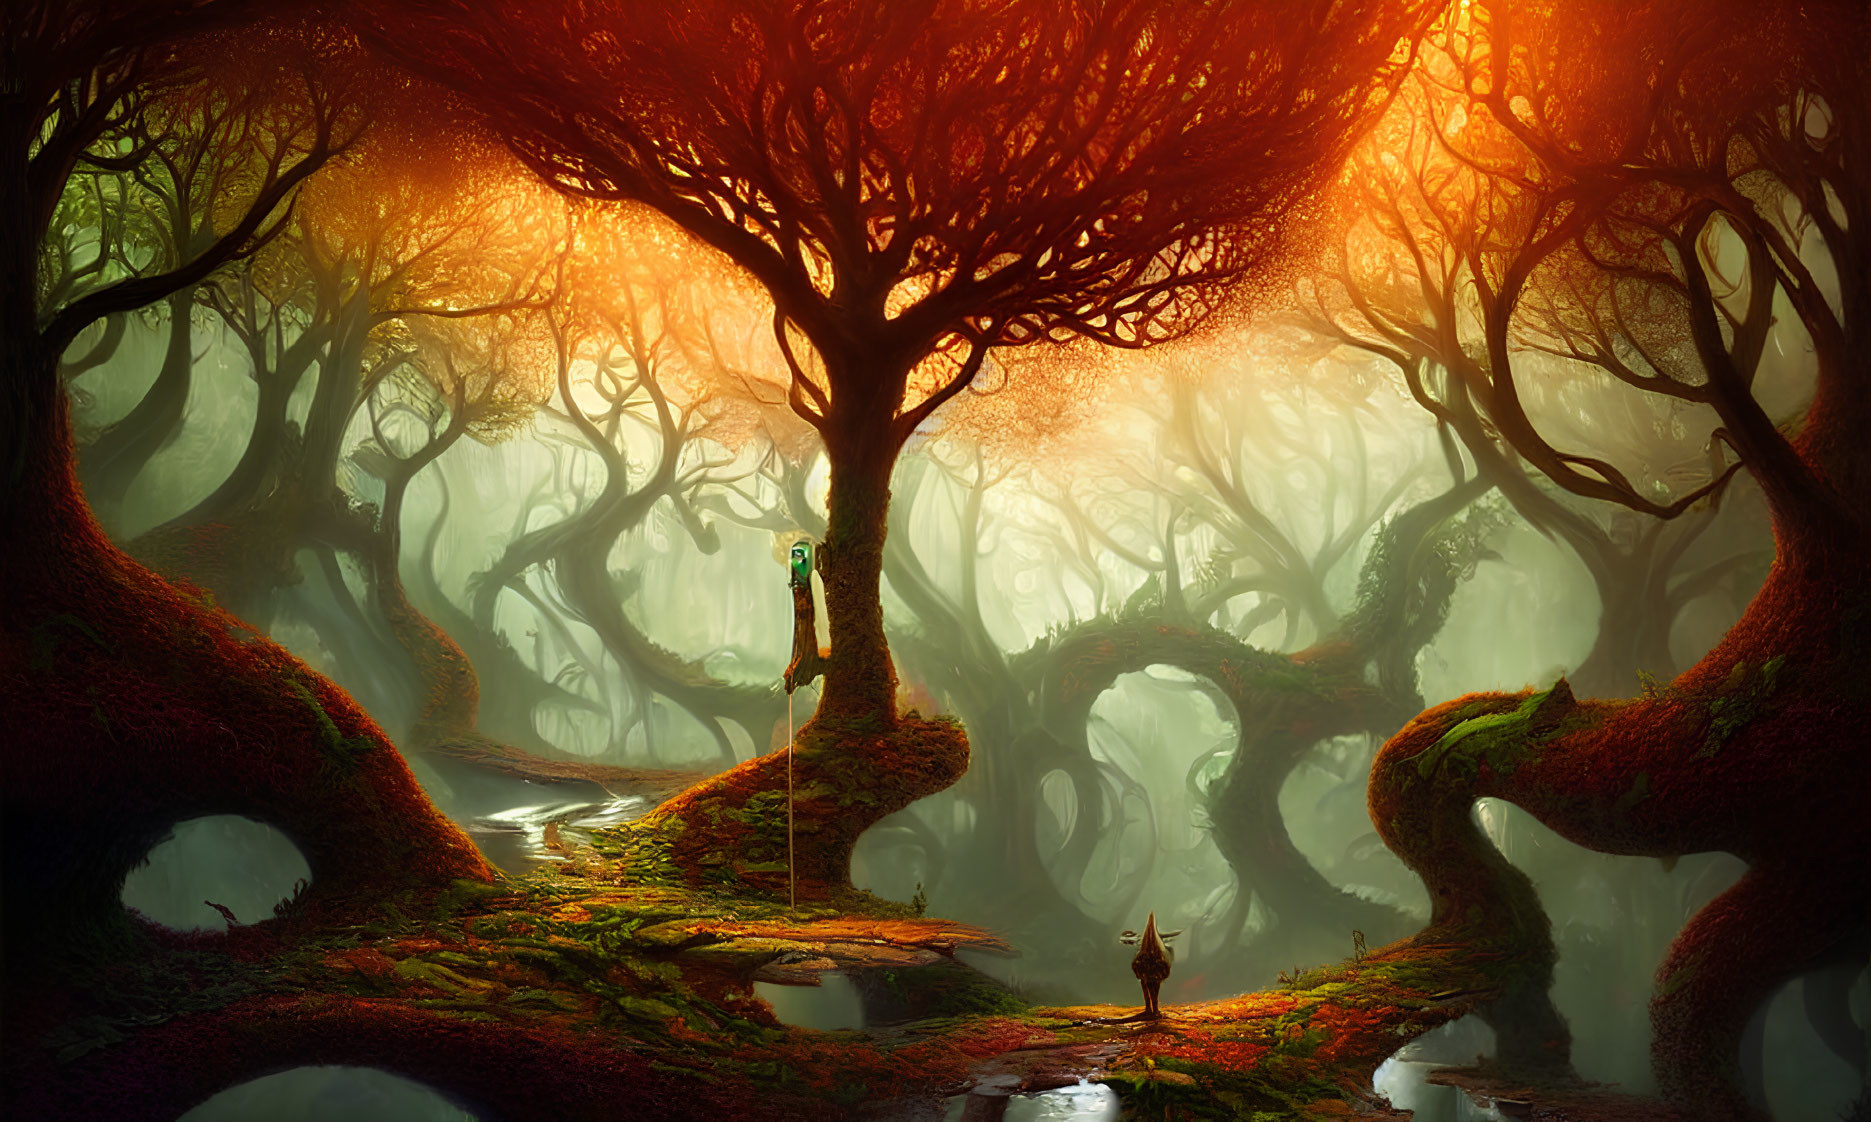 Ethereal forest scene with twisted trees, glowing light, cloaked figure, and fox